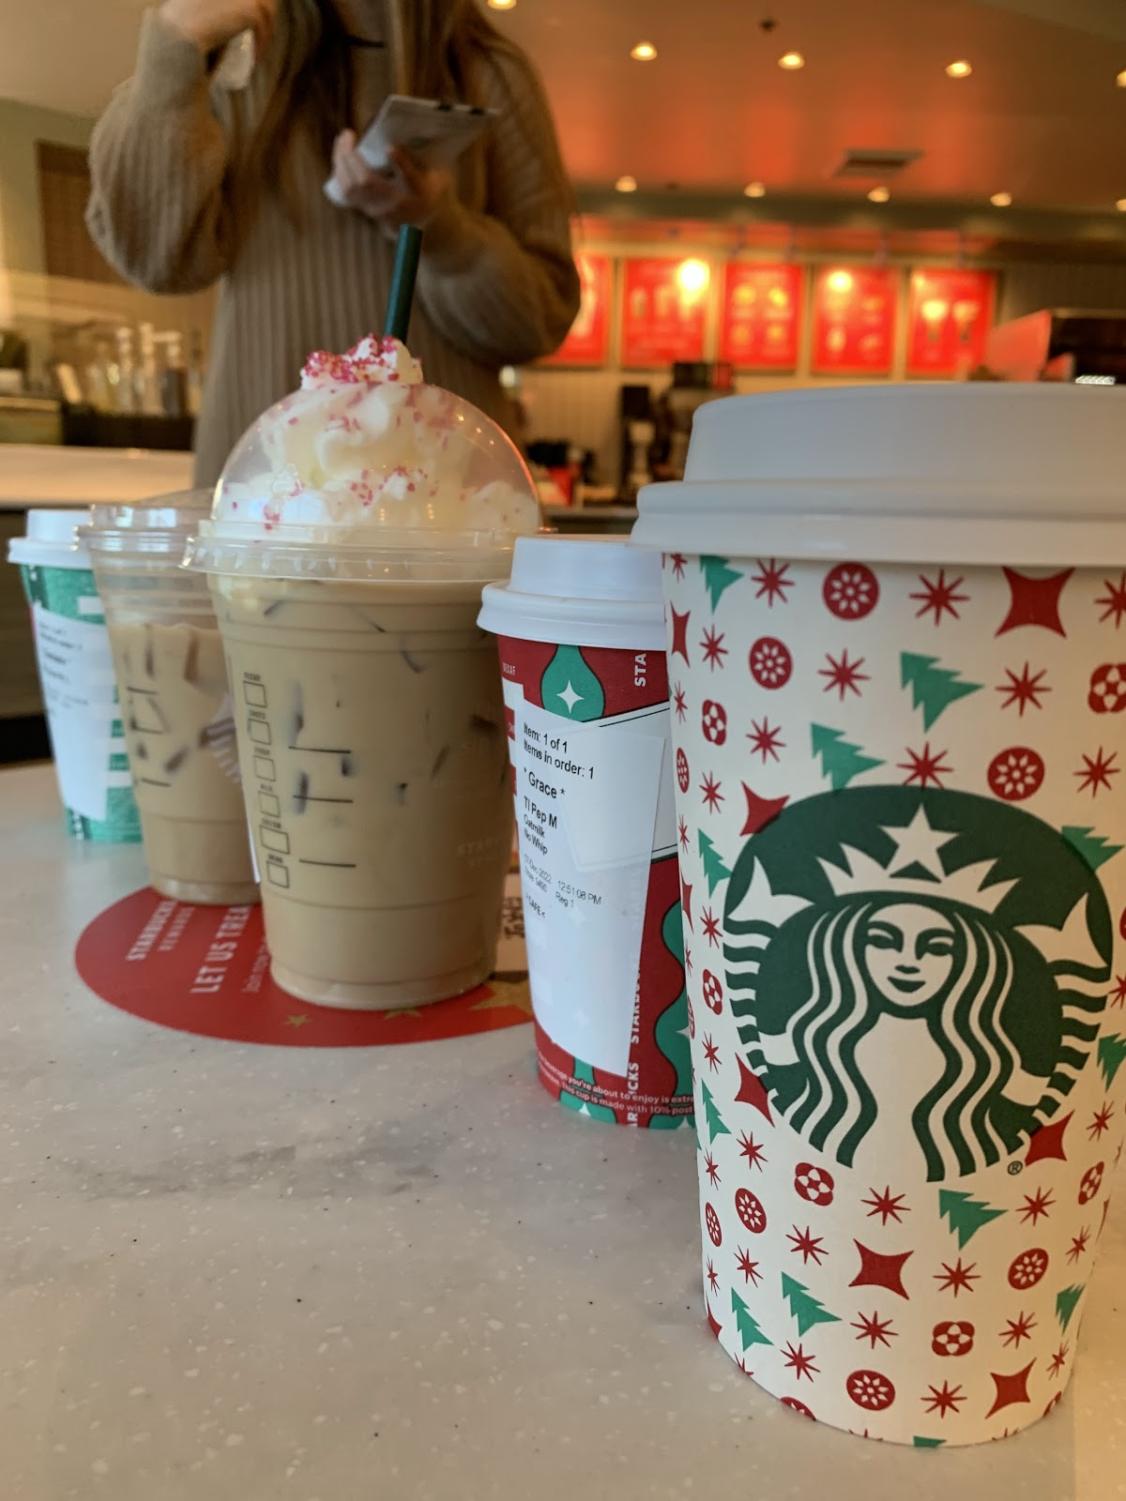 Starbucks holiday drinks 2022: When to get Peppermint Mocha, more